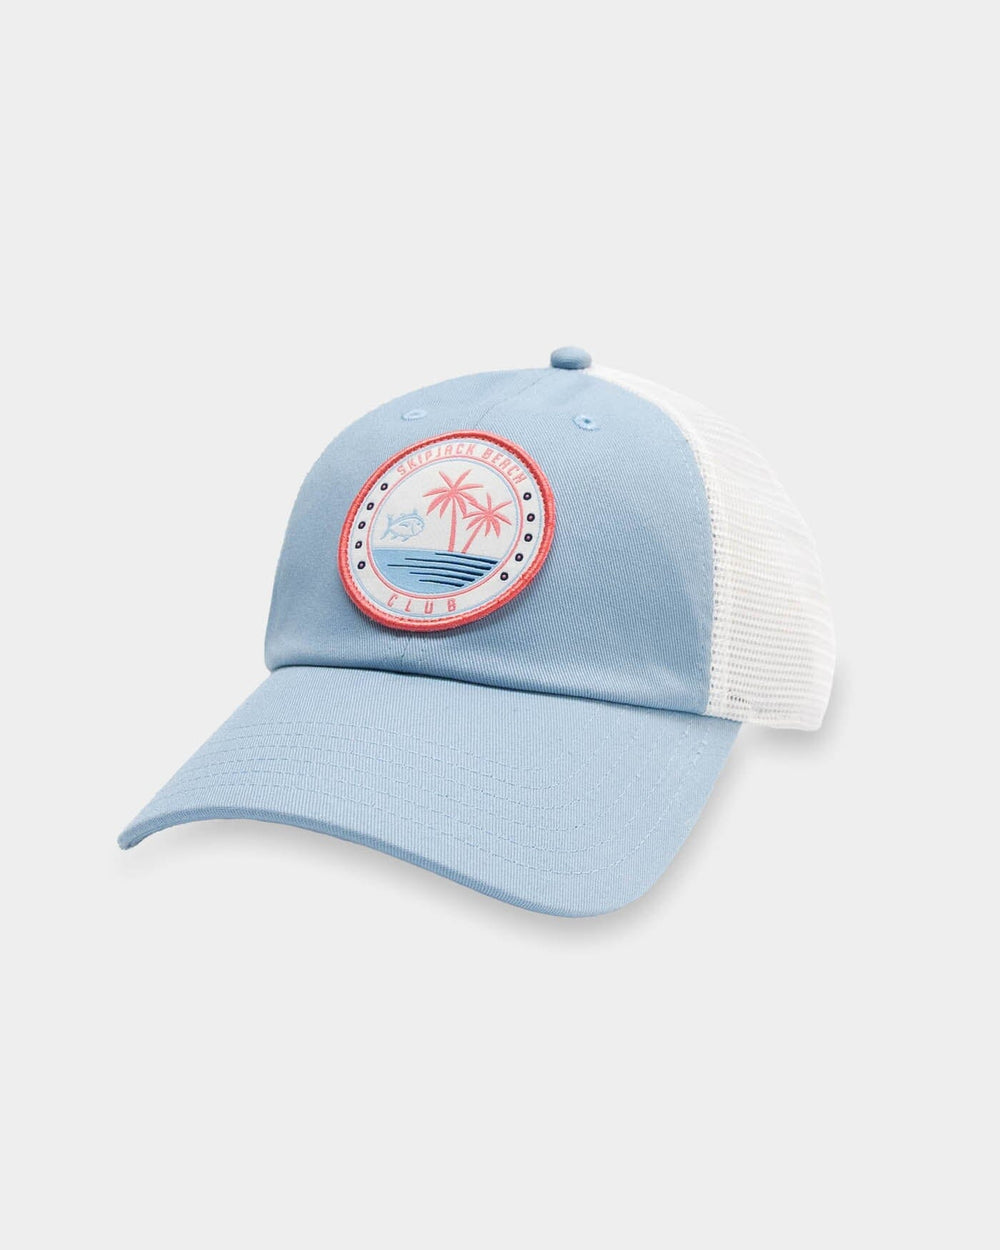 The front view of the Southern Tide Skipjack Beach Club Trucker Hat by Southern Tide - Light Blue